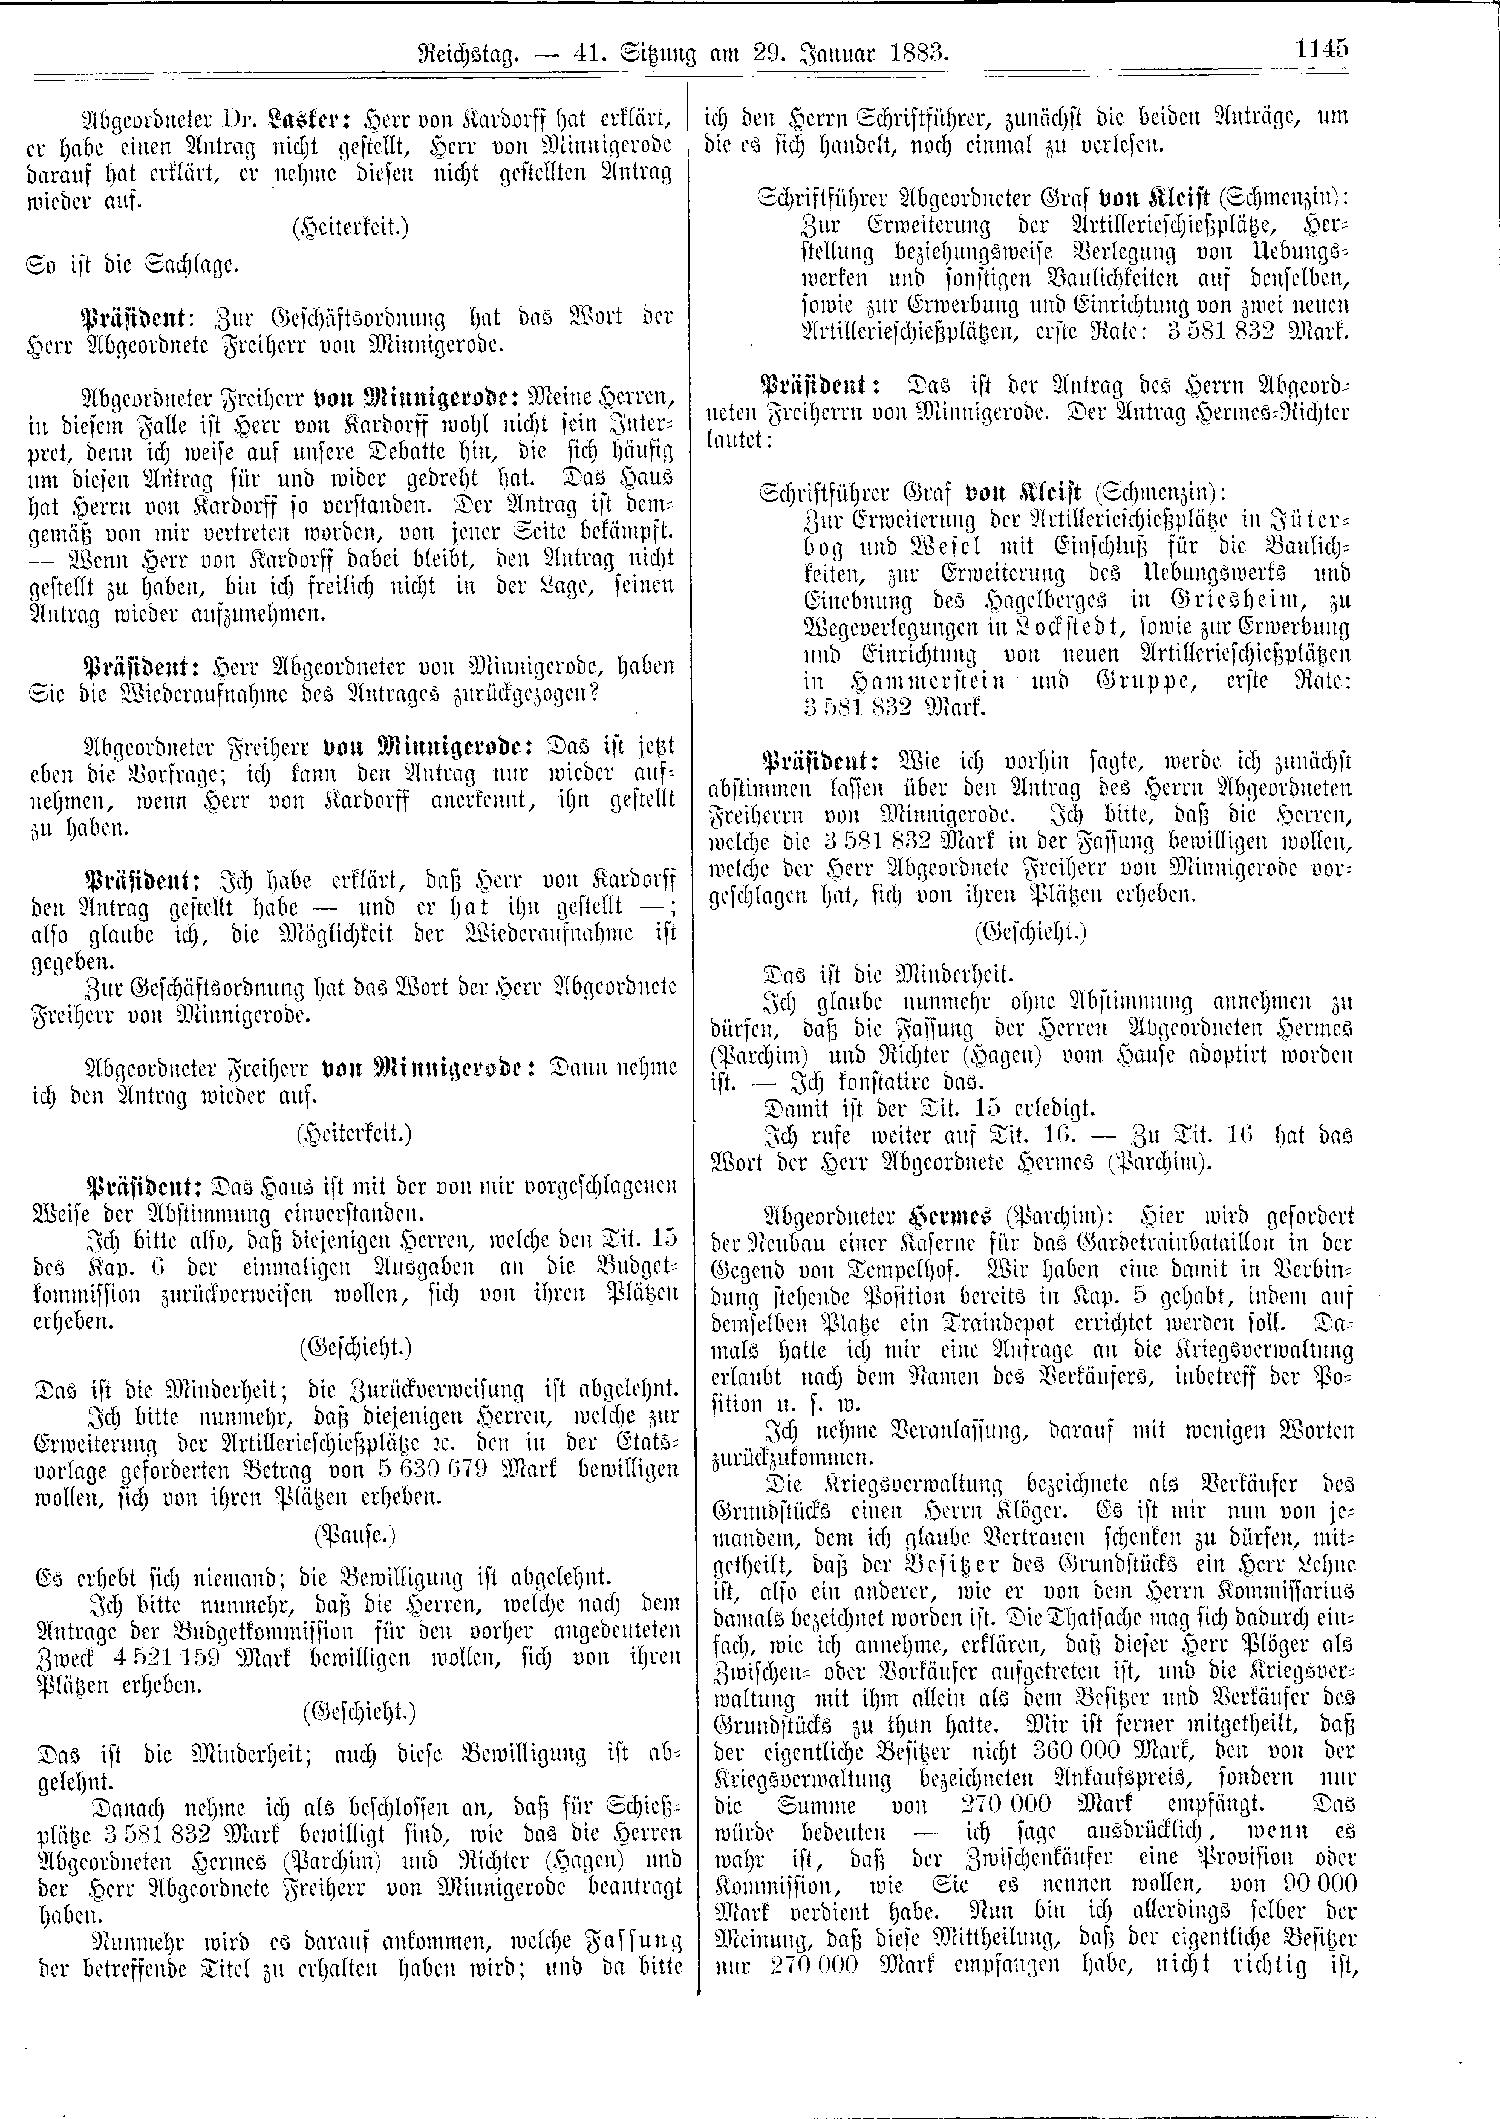 Scan of page 1145